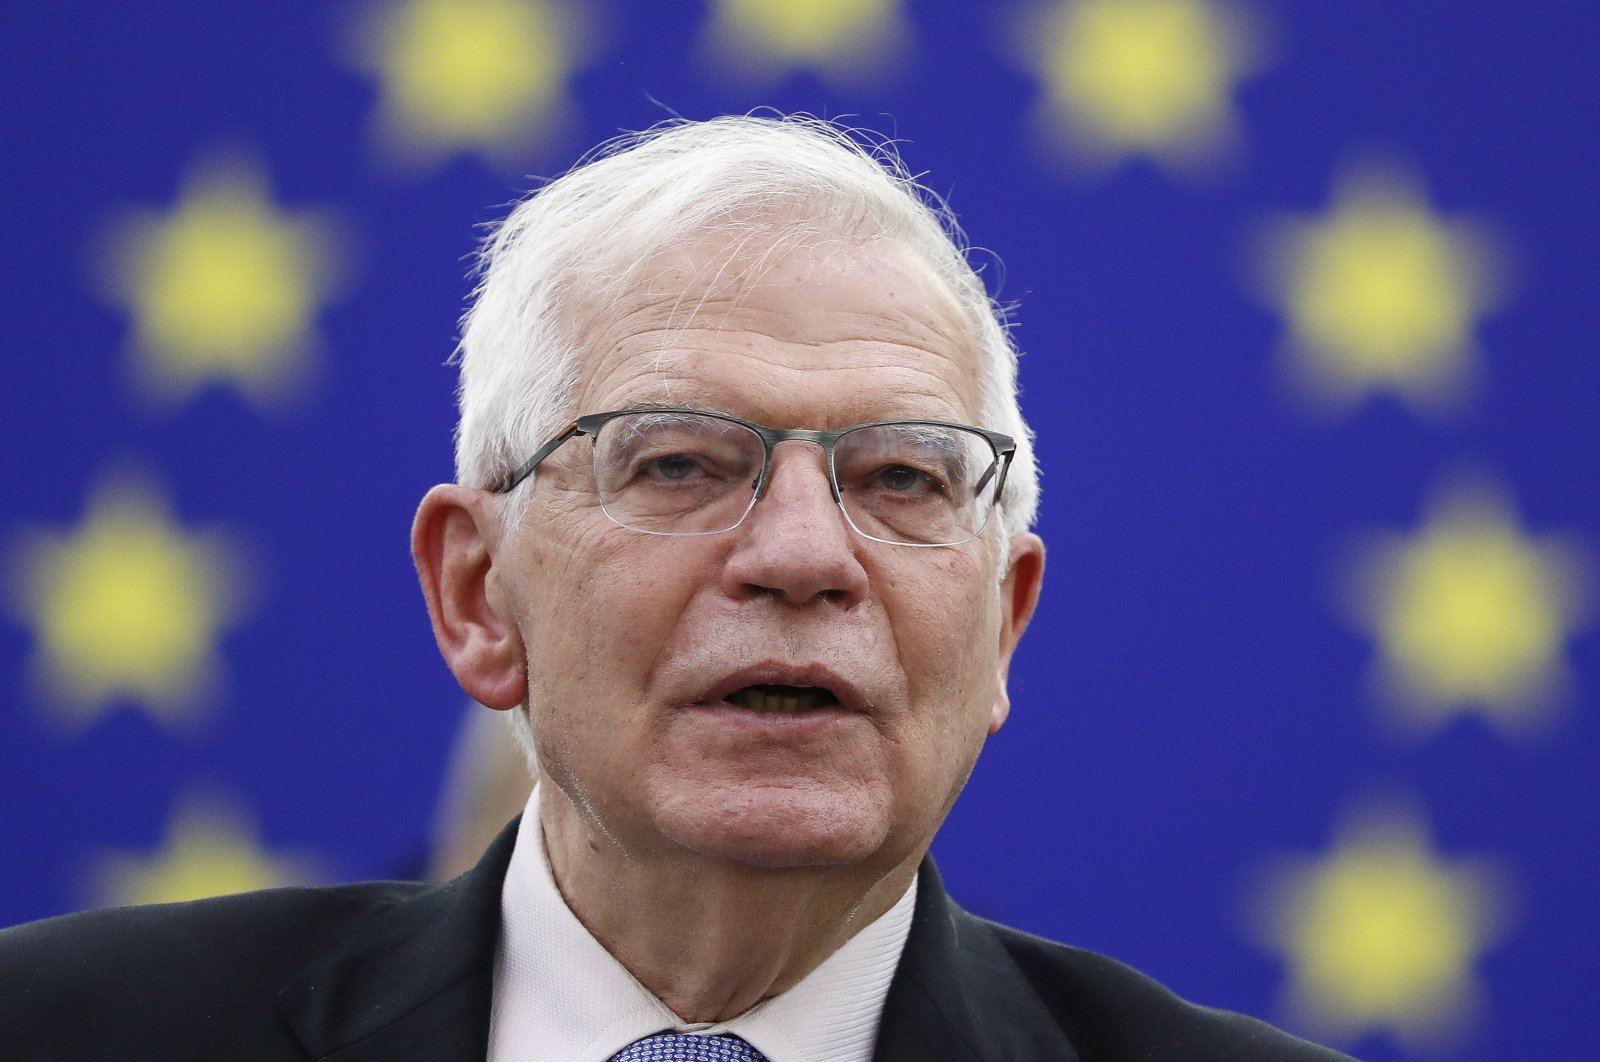 High Representative of the European Union for Foreign Affairs and Security Policy, Josep Borrell delivers a speech on the EU-Africa relations during a plenary session of the European Parliament in Strasbourg, France, Feb. 15, 2022. (EPA Photo)